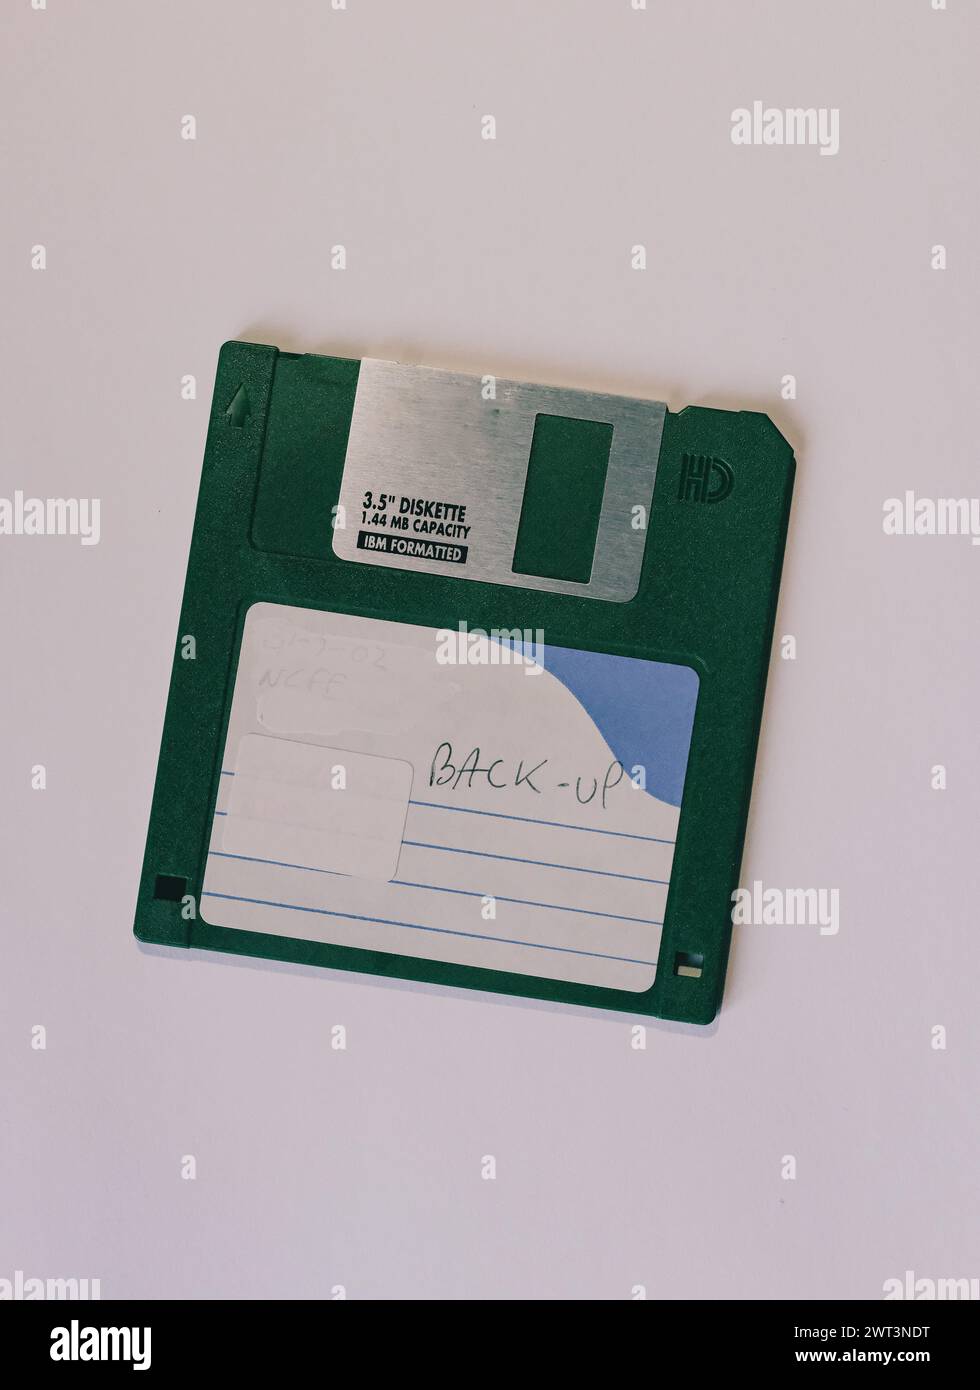 Floppy Discs used for File storage and backup in the 1980s an d 1990s on home and business PCs Stock Photo